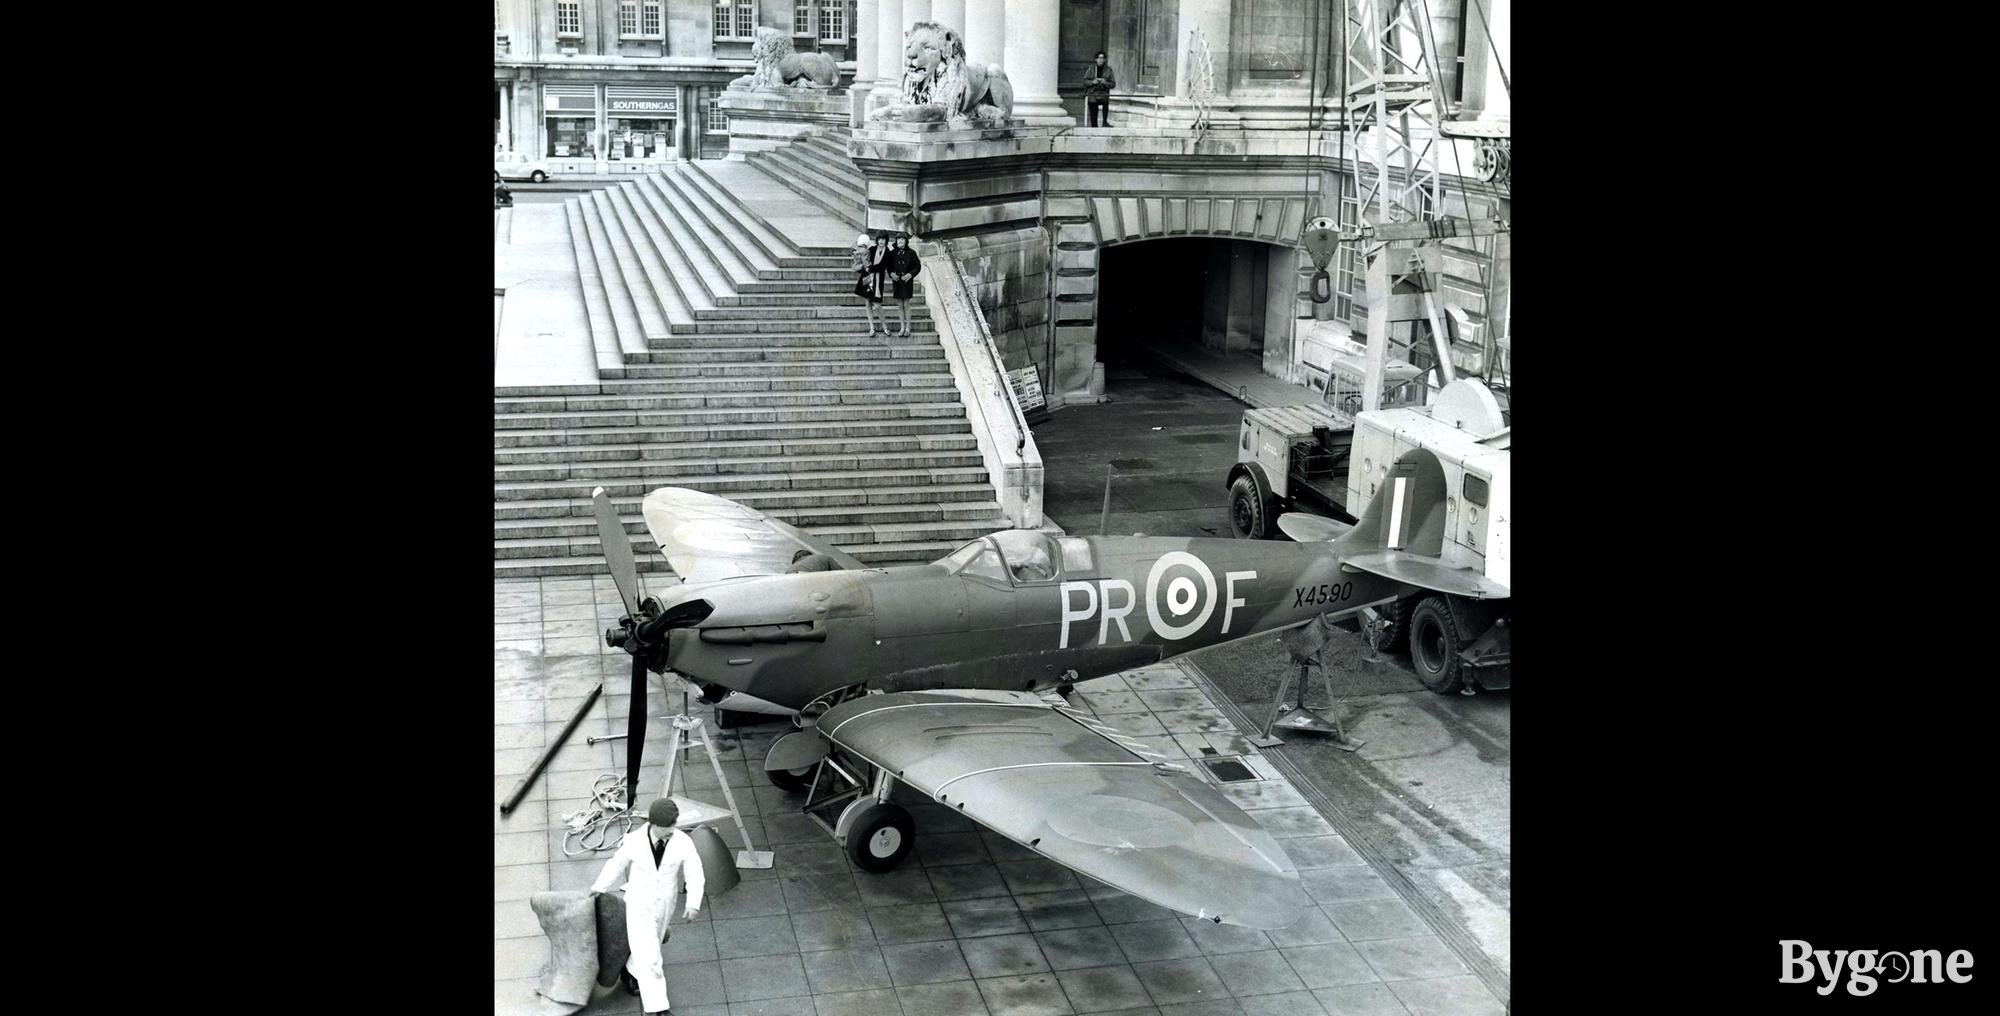 Prop Spitfire on display outside Portsmouth Guildhall, 1969